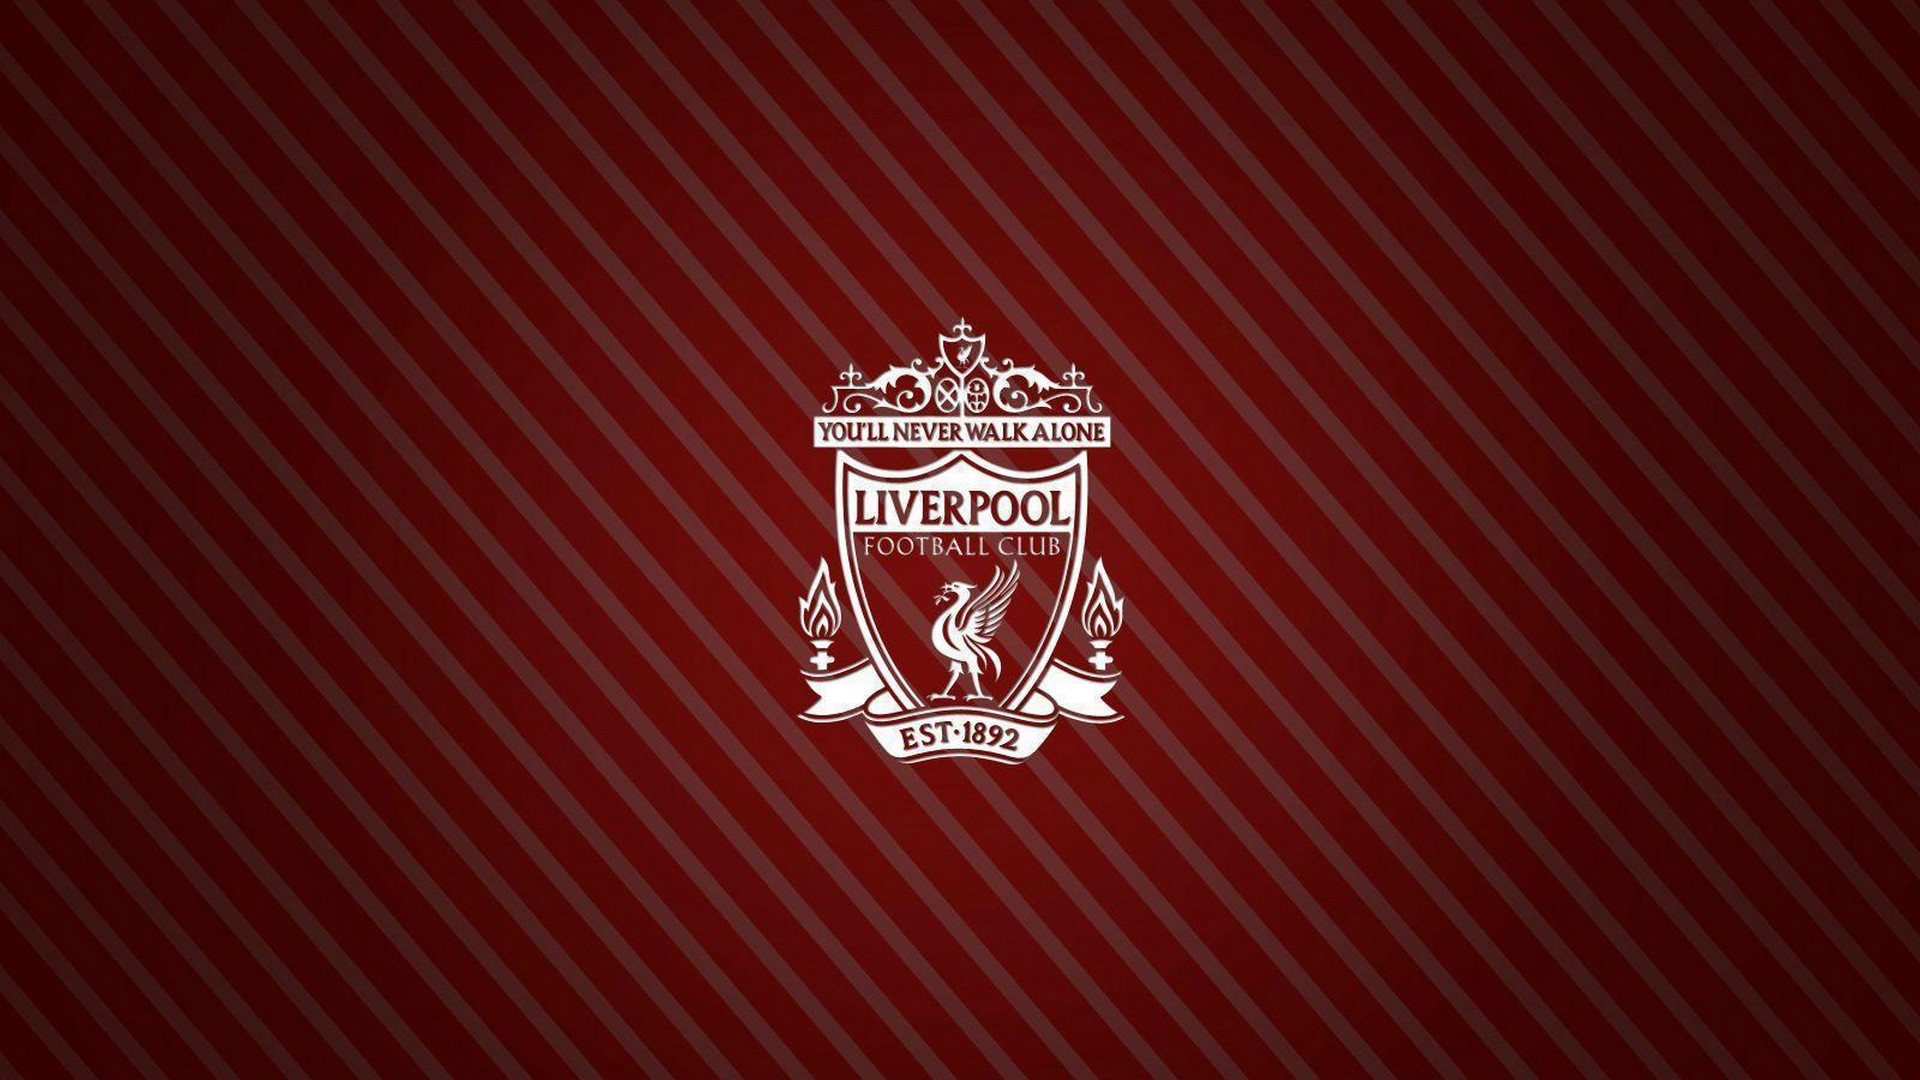 Liverpool Wallpaper HD With high-resolution 1920X1080 pixel. You can use this wallpaper for your Desktop Computer Backgrounds, Mac Wallpapers, Android Lock screen or iPhone Screensavers and another smartphone device